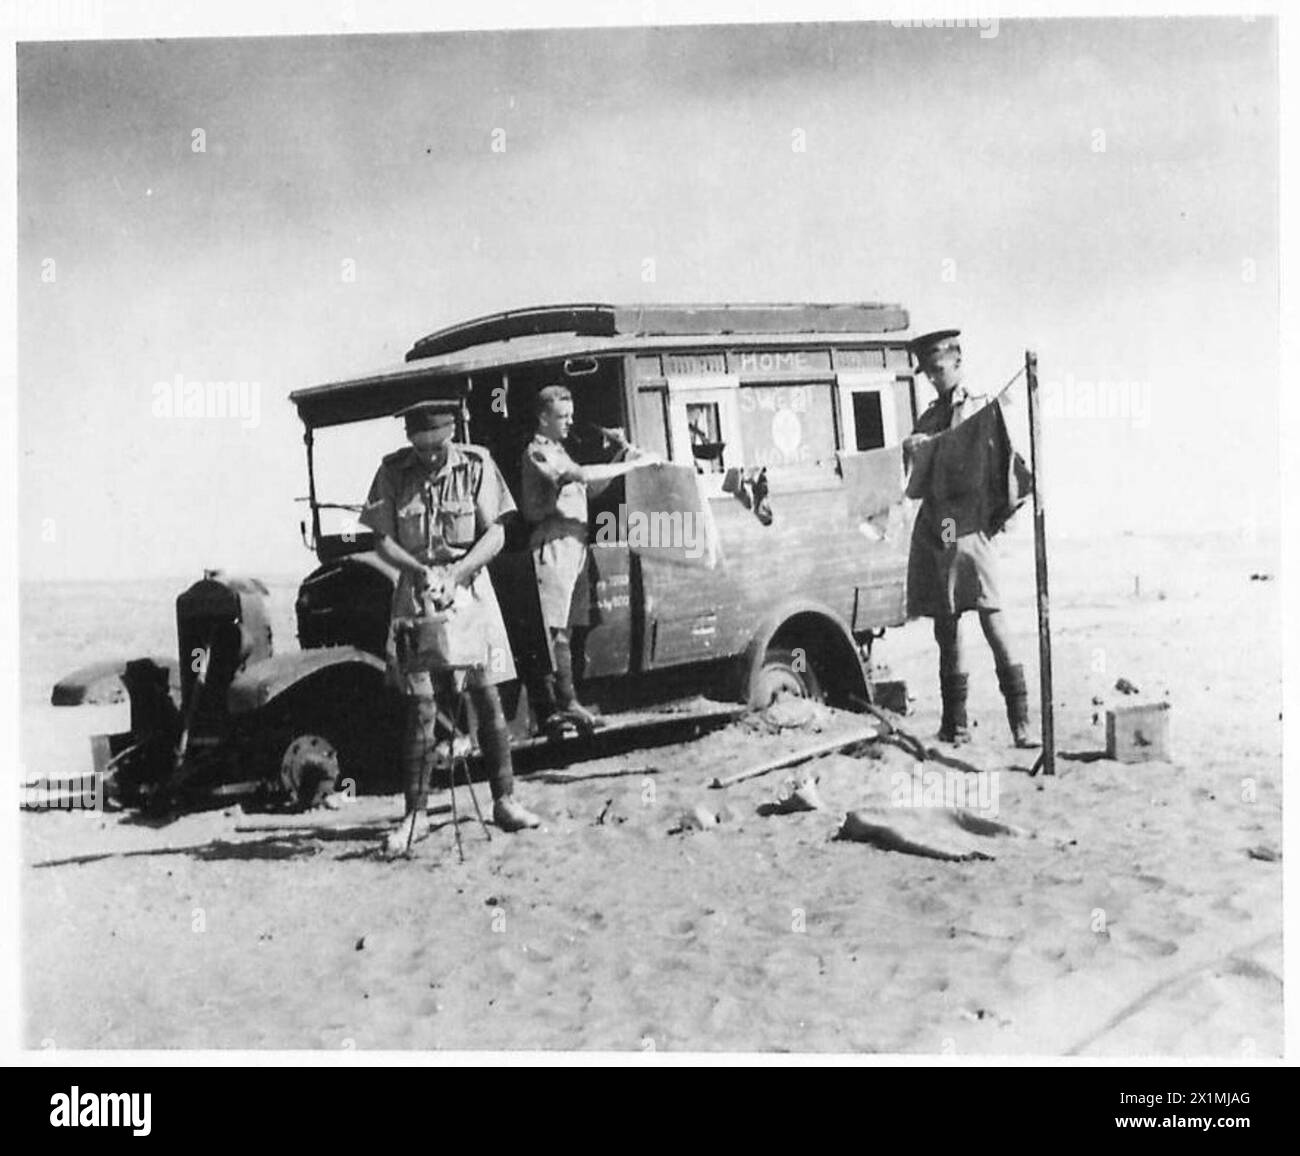 PHOTOGRAPHS TAKEN OF THE WORK OF THE MILITARY POLICE IN THE WESTERN DESERT - Washing day for the policemen outside their home - an Italian ambulance - called by them 'Home, sweet Home', British Army Stock Photo